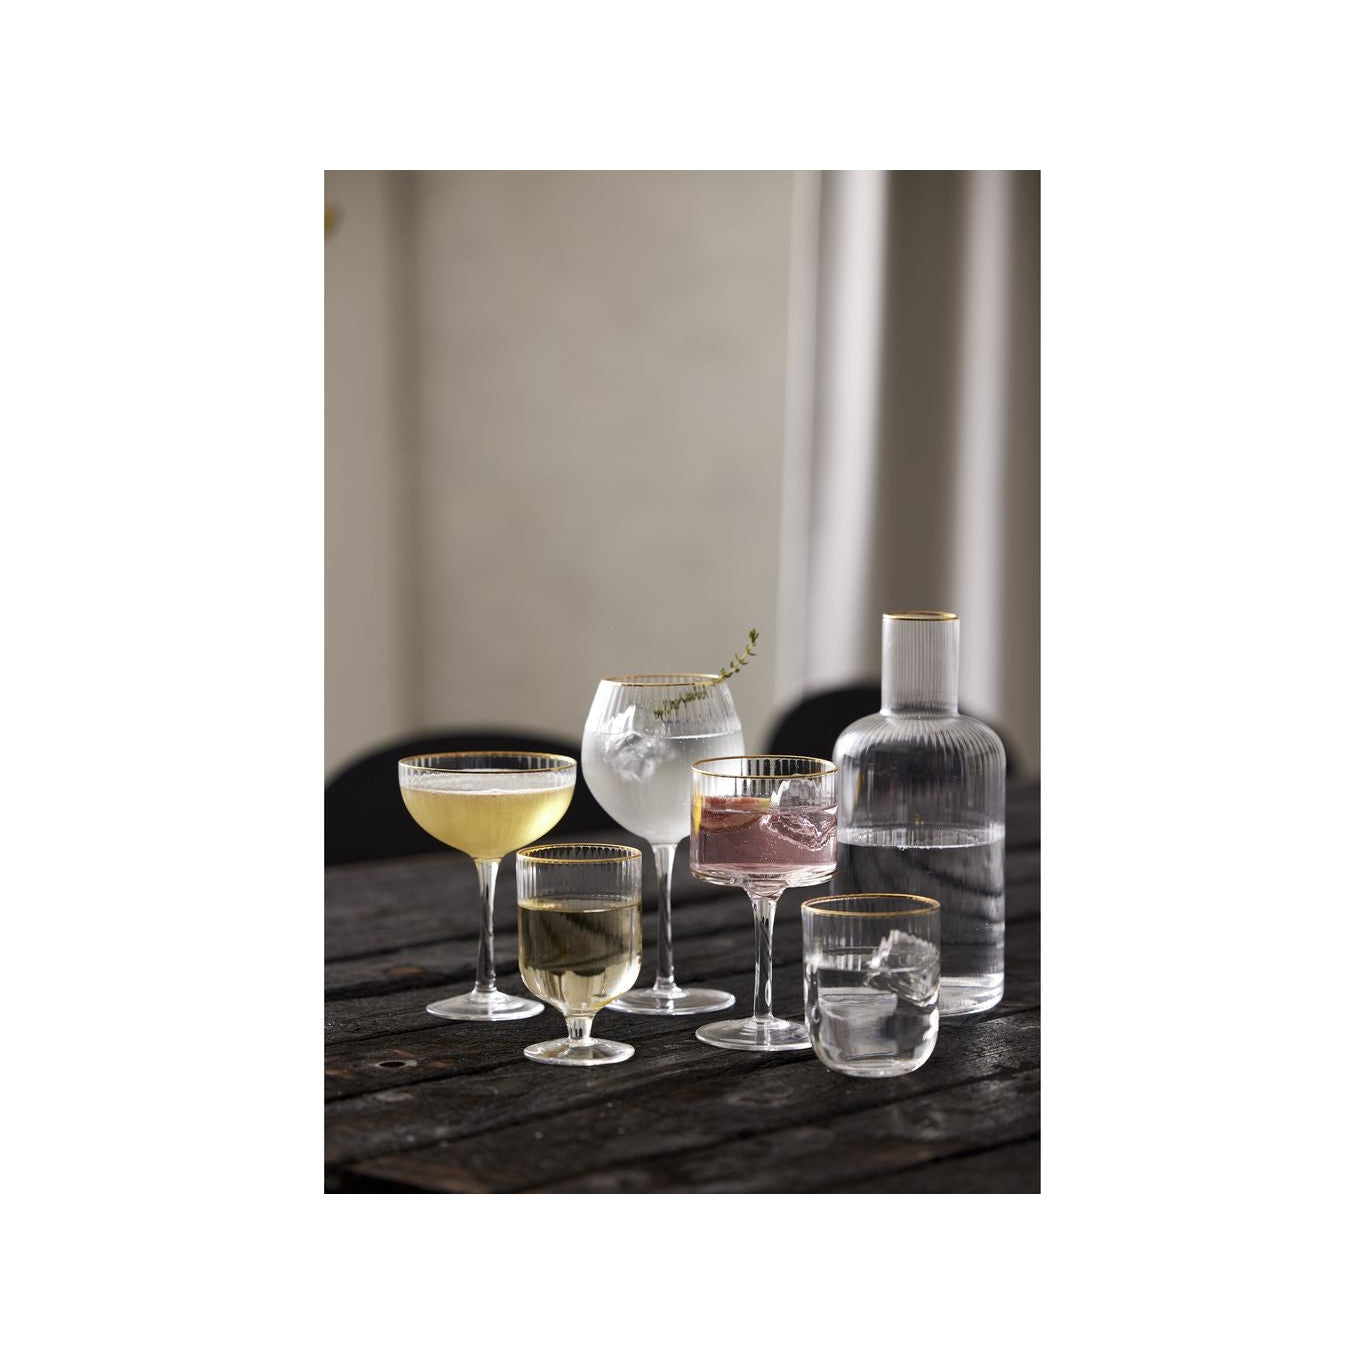 Lyngby Glas Palermo Gin & Tonic Glass 65 Cl, 4 PC.